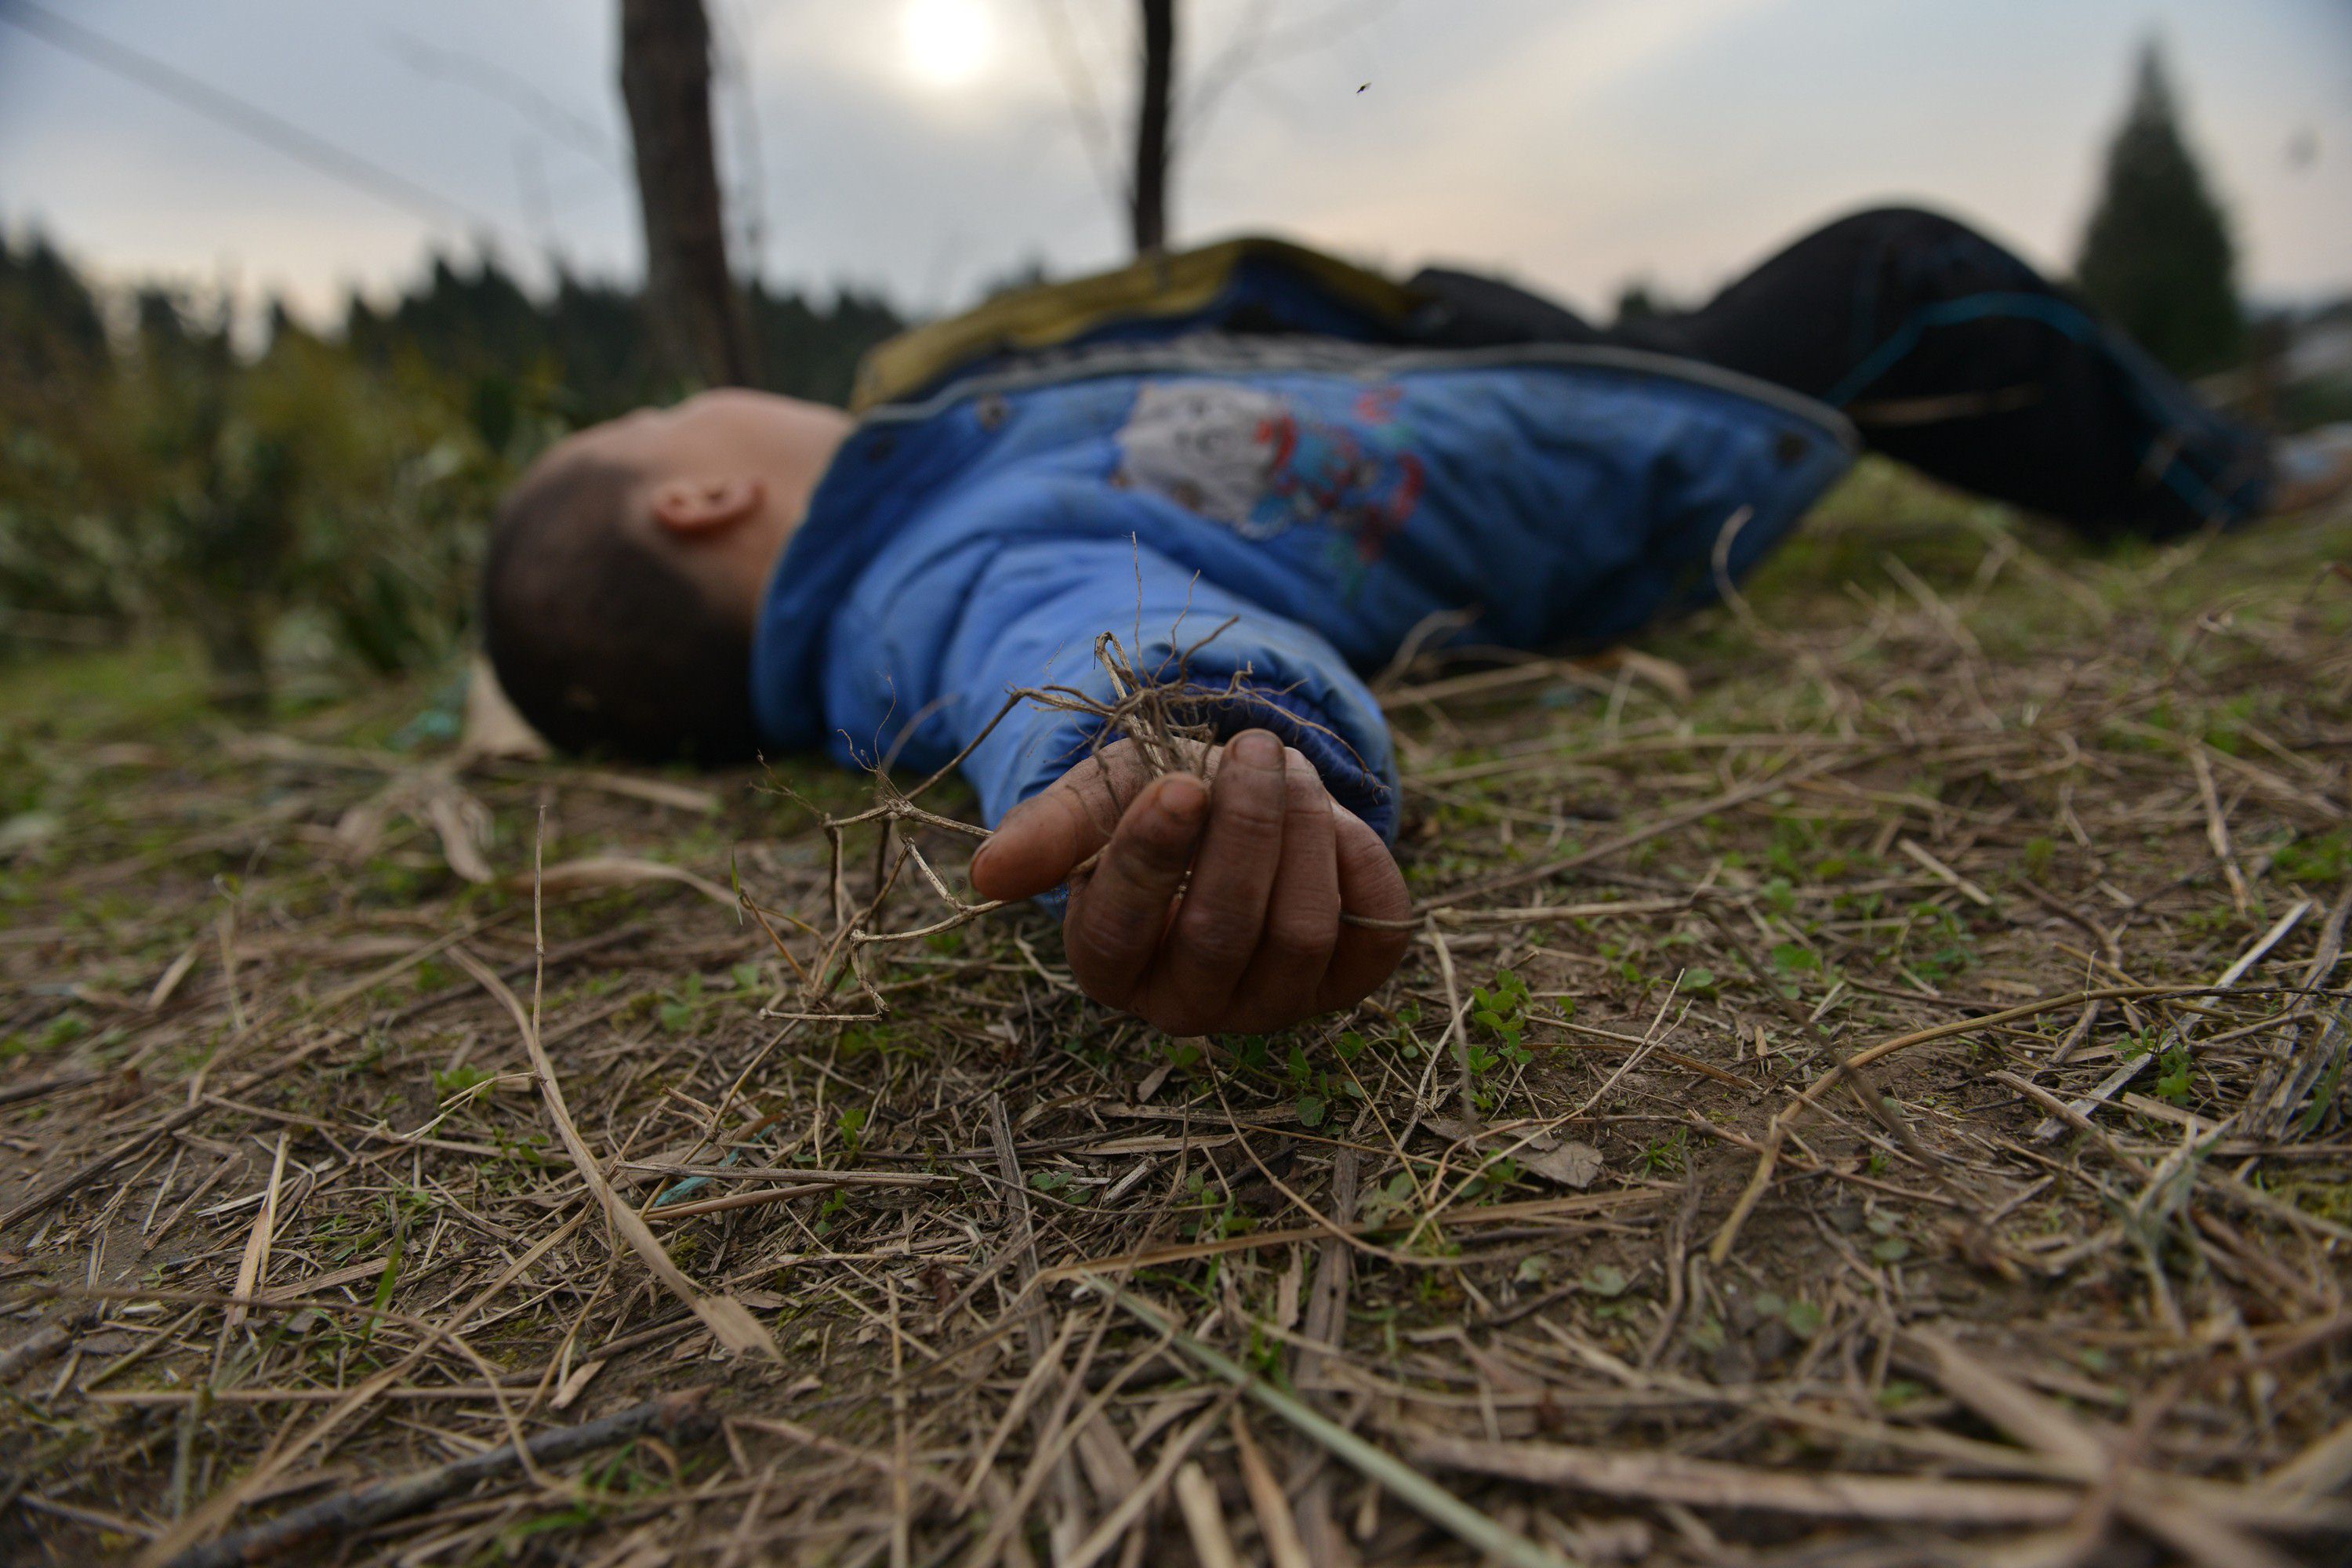 An eight-year-old boy - who suffers from HIV and was given the pseudonym Kunkun by Chinese media - lying on the ground in a village in Xichong county. Photo: AFP